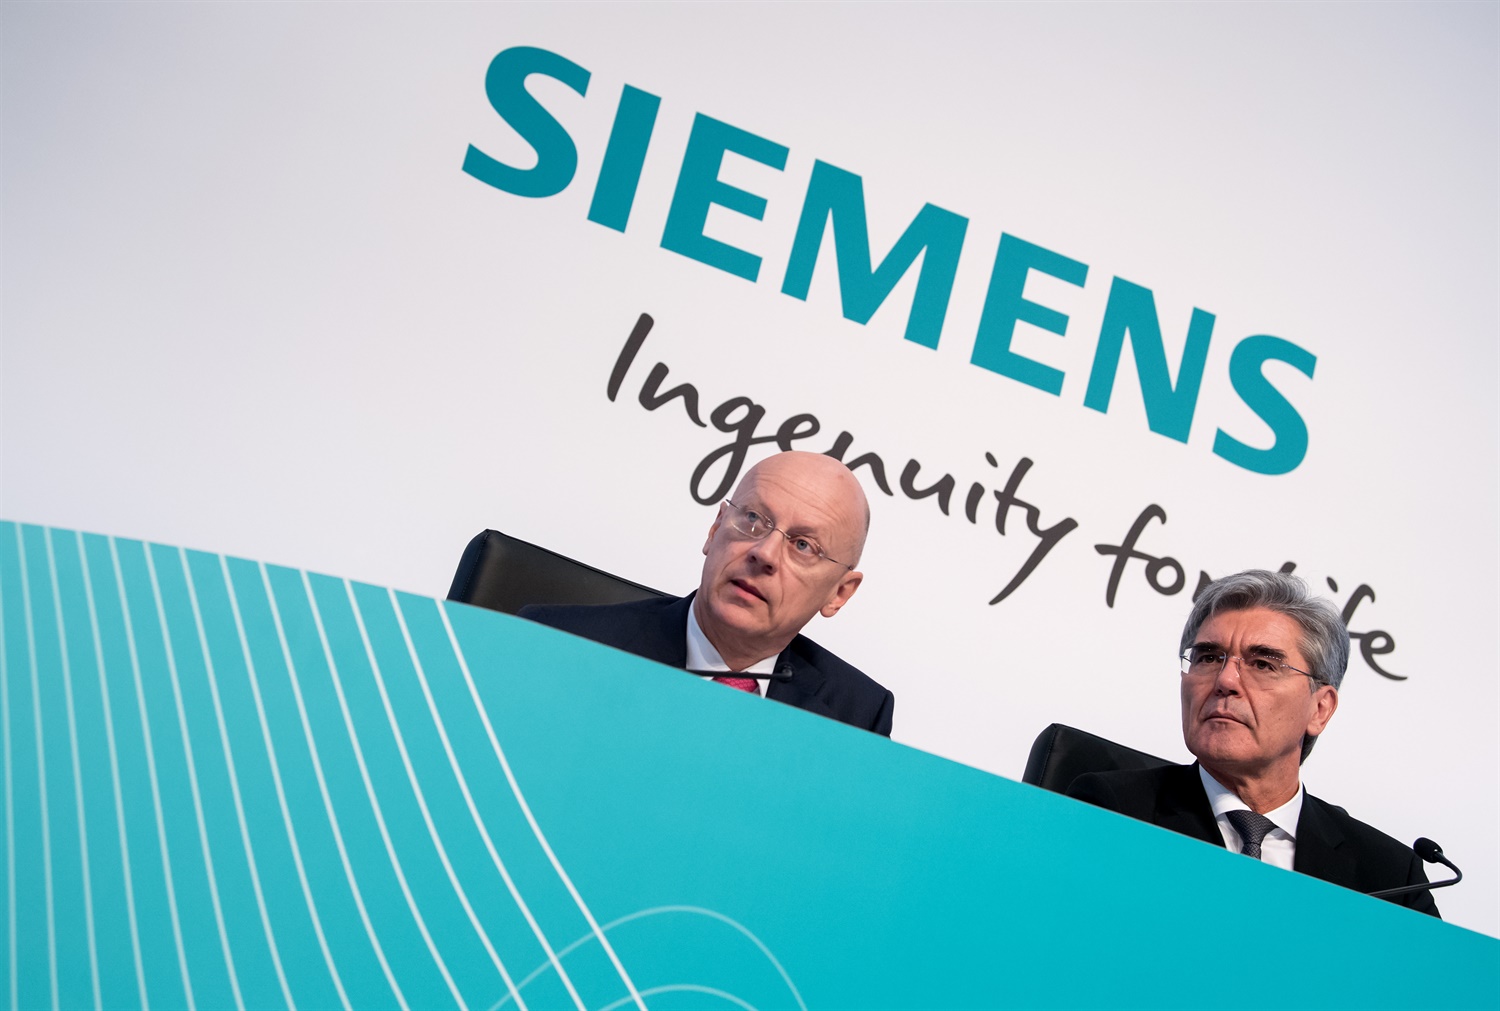 Siemens and Alstom offer to sell high-speed train technology to address EU antitrust concerns